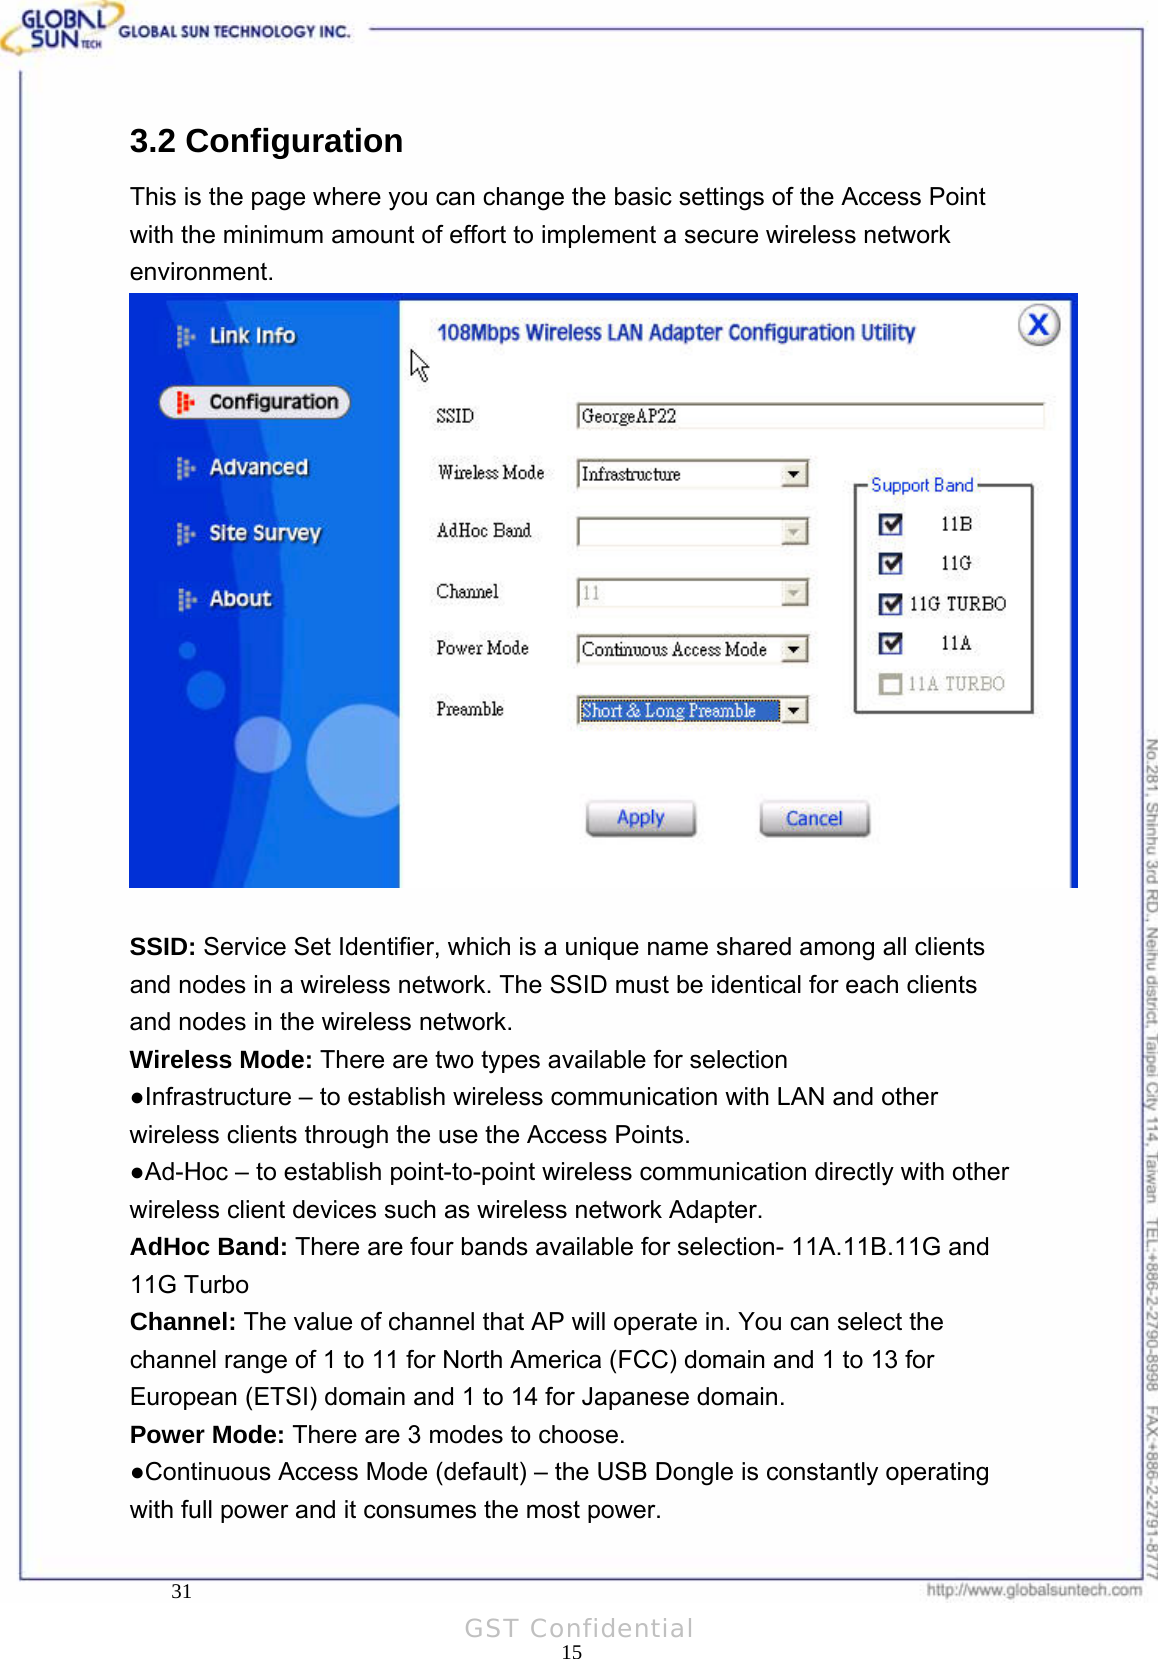  Product: 802.11a/g Wireless USB Dongle Model: WL UD 2554 17A3.2 Configuration This is the page where you can change the basic settings of the Access Point with the minimum amount of effort to implement a secure wireless network environment.   SSID: Service Set Identifier, which is a unique name shared among all clients and nodes in a wireless network. The SSID must be identical for each clients and nodes in the wireless network. Wireless Mode: There are two types available for selection ●Infrastructure – to establish wireless communication with LAN and other wireless clients through the use the Access Points. ●Ad-Hoc – to establish point-to-point wireless communication directly with other wireless client devices such as wireless network Adapter. AdHoc Band: There are four bands available for selection- 11A.11B.11G and 11G Turbo Channel: The value of channel that AP will operate in. You can select the channel range of 1 to 11 for North America (FCC) domain and 1 to 13 for European (ETSI) domain and 1 to 14 for Japanese domain. Power Mode: There are 3 modes to choose. ●Continuous Access Mode (default) – the USB Dongle is constantly operating with full power and it consumes the most power.     31 15GST Confidential 